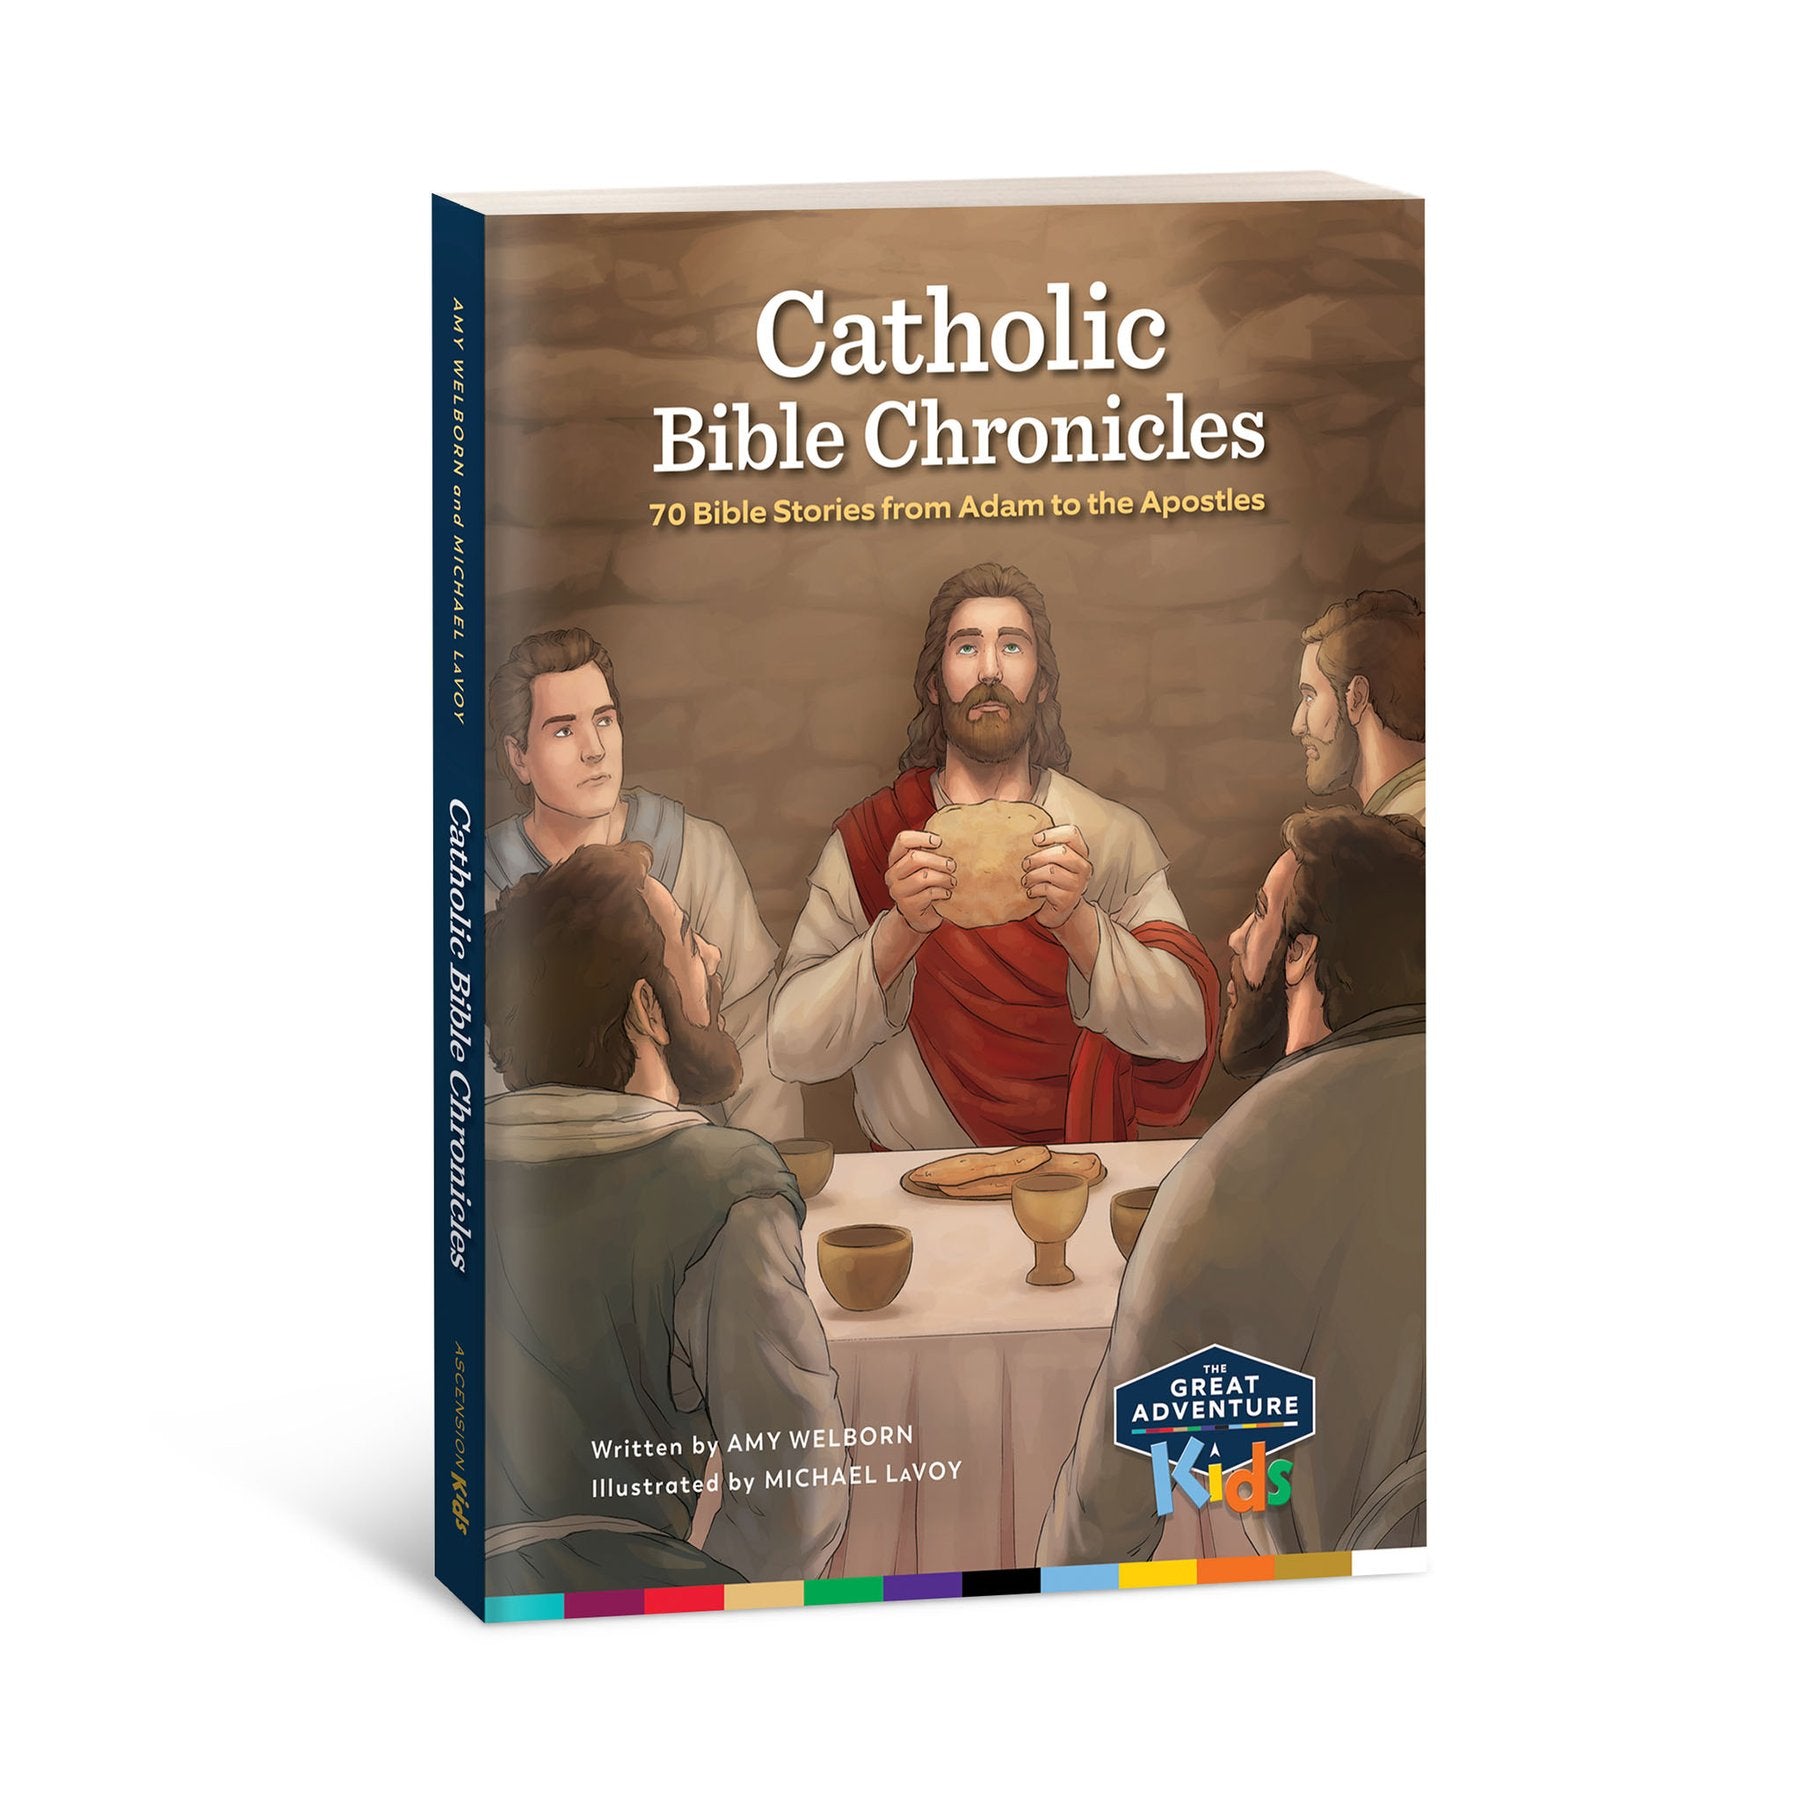 Great Adventure Kids Catholic Bible Chronicles (ages 8-12)